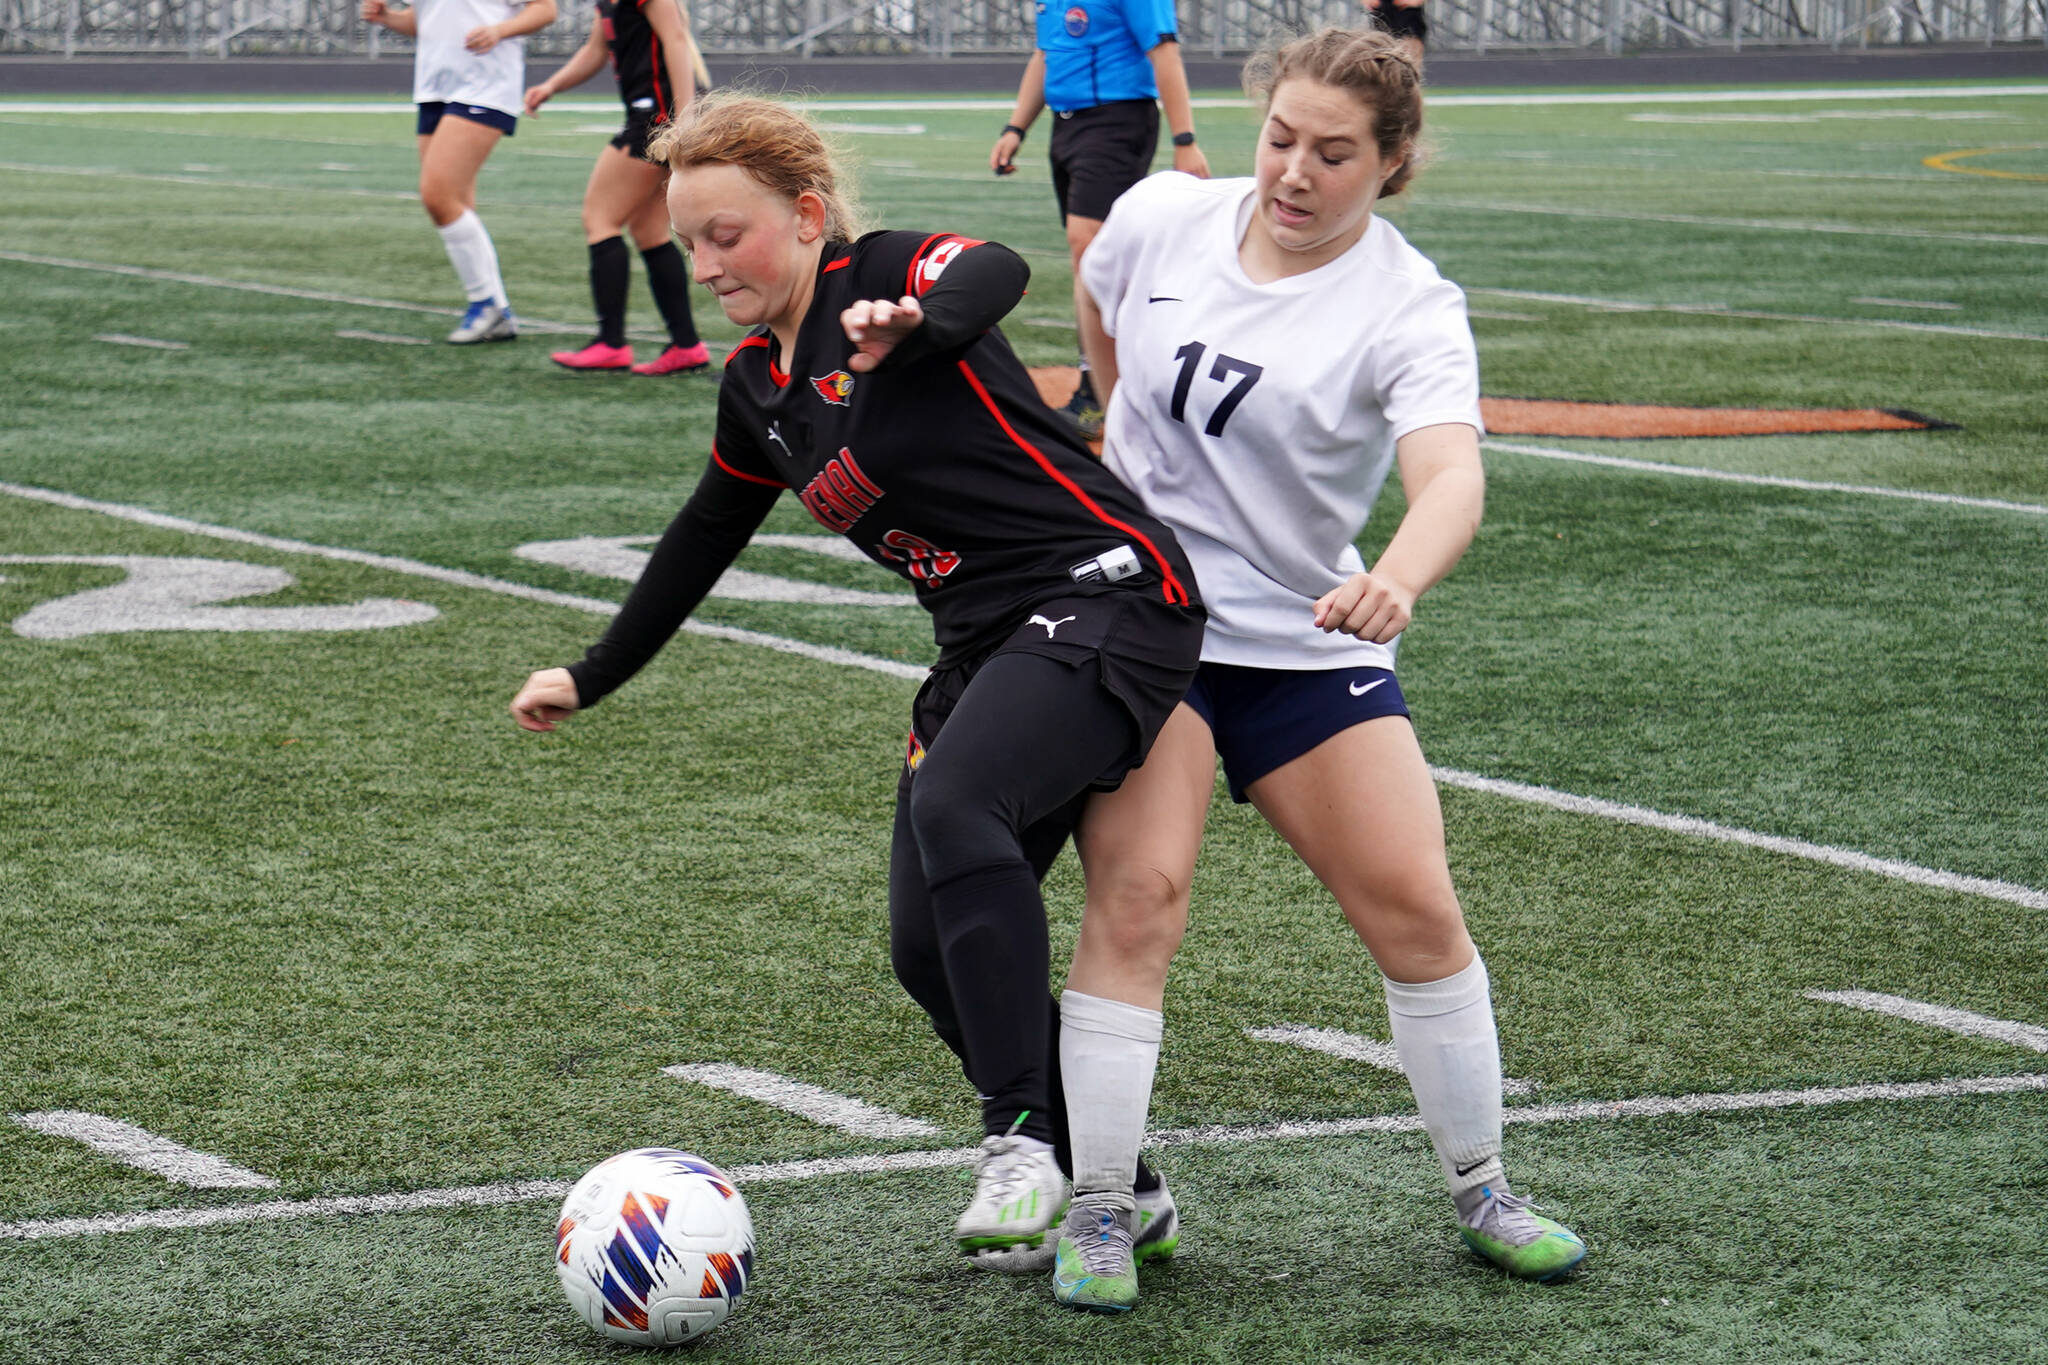 Kenai Central’s Kylee Verkuilen battles for the ball with Soldotna’s Liberty Miller during the Division II Soccer State Championship on Saturday, May 27, 2023, at West Anchorage High School in Anchorage, Alaska. (Jake Dye/Peninsula Clarion)